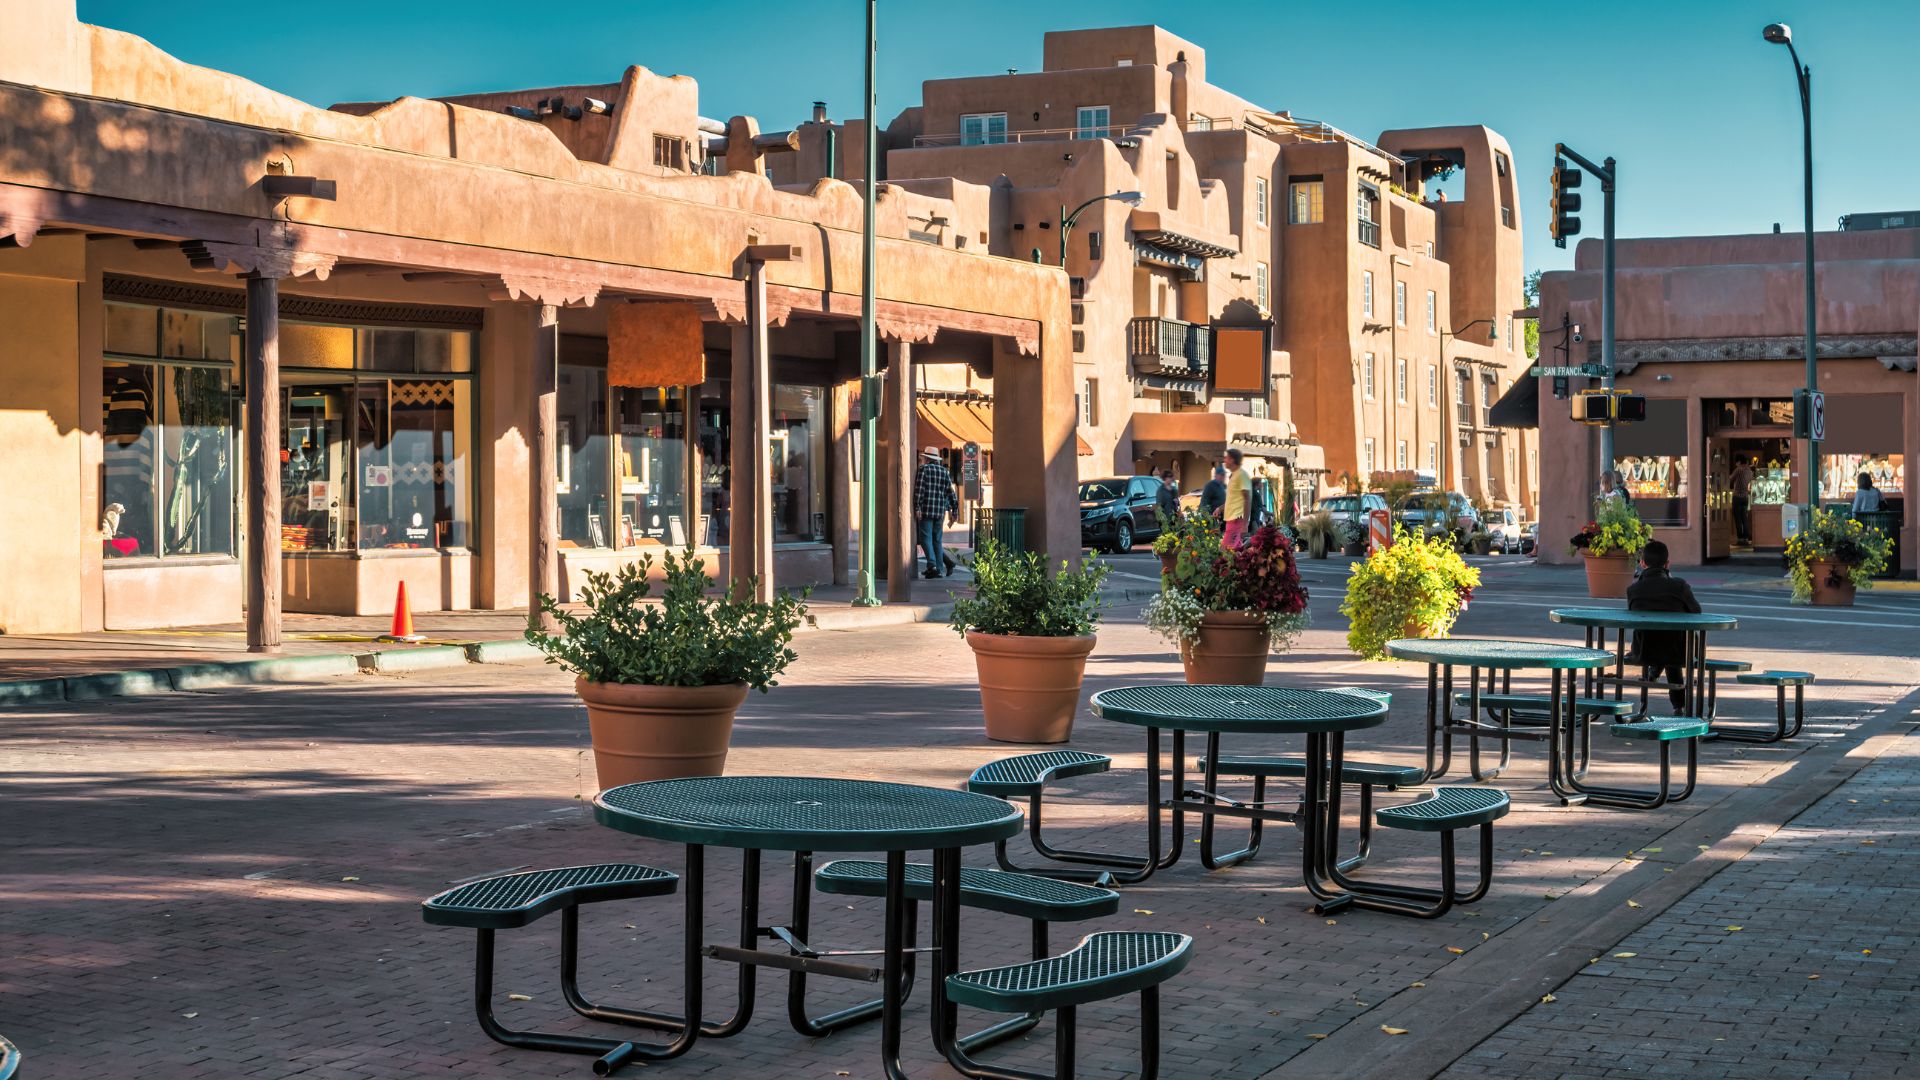 picnic tables out on the cobblestone streets of the santa fe plaza